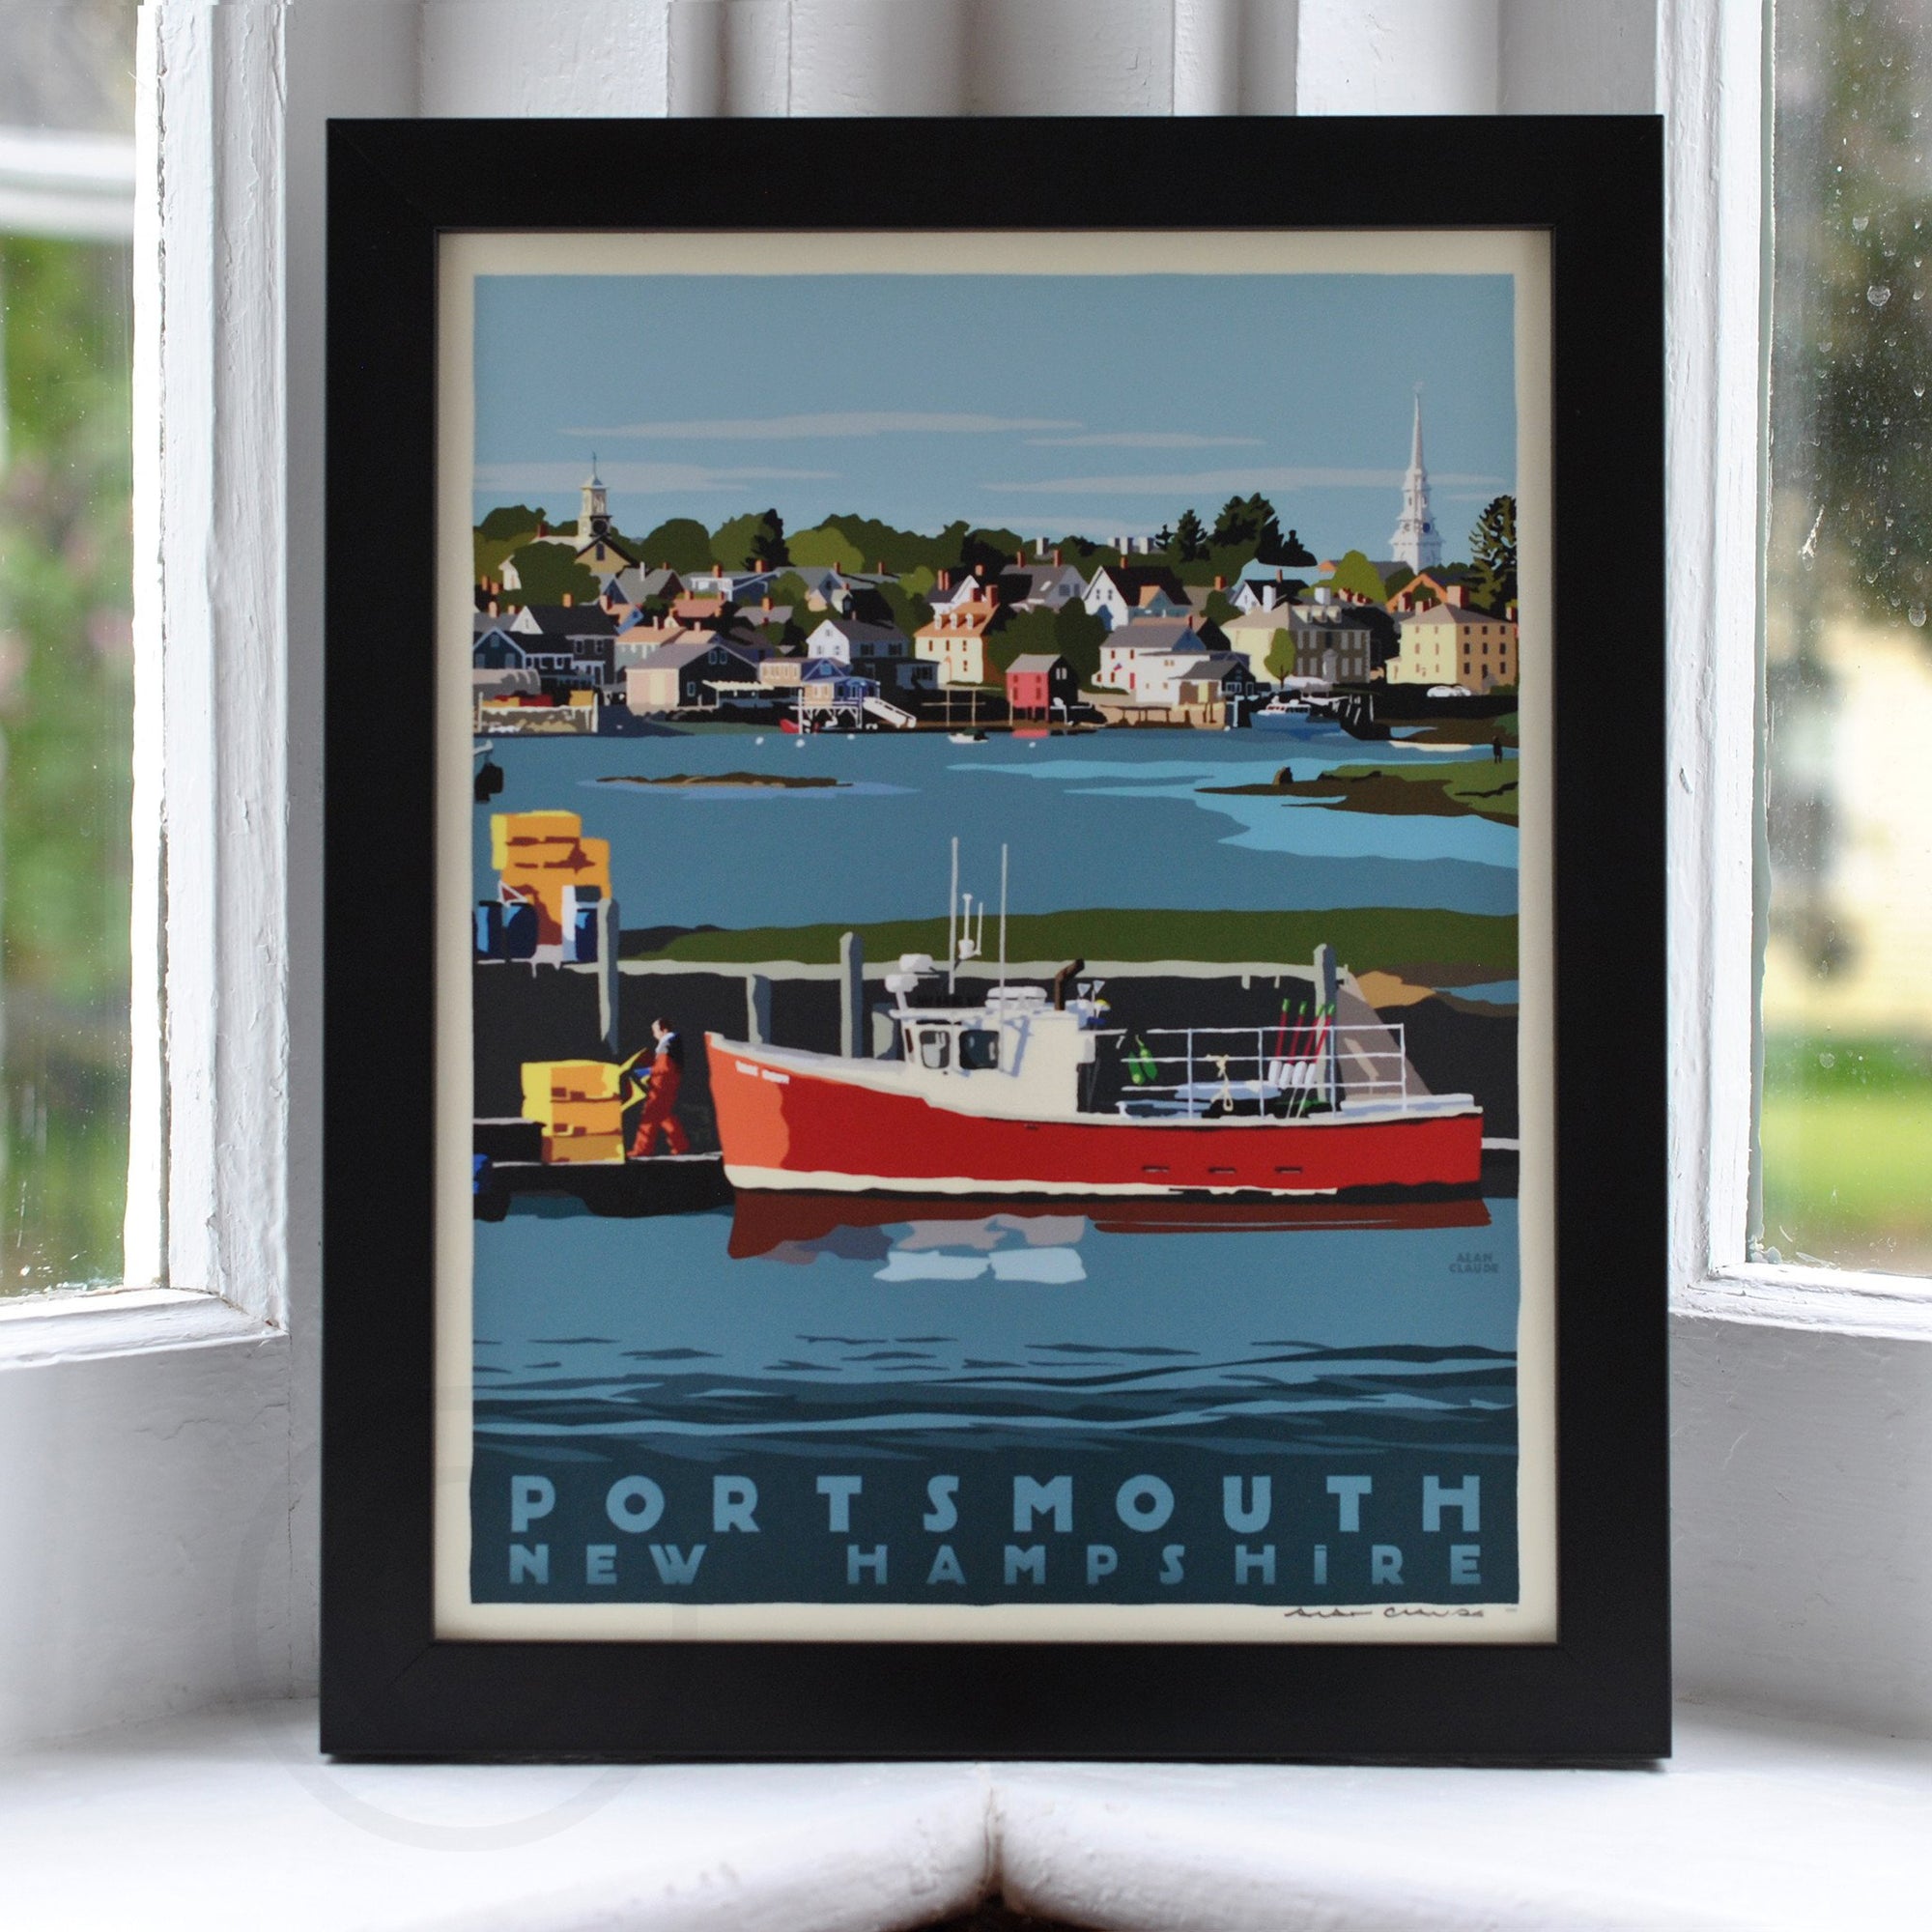 Portsmouth Lobster Boat Art Print 8" x 10" Framed Travel Poster By Alan Claude - New Hampshire